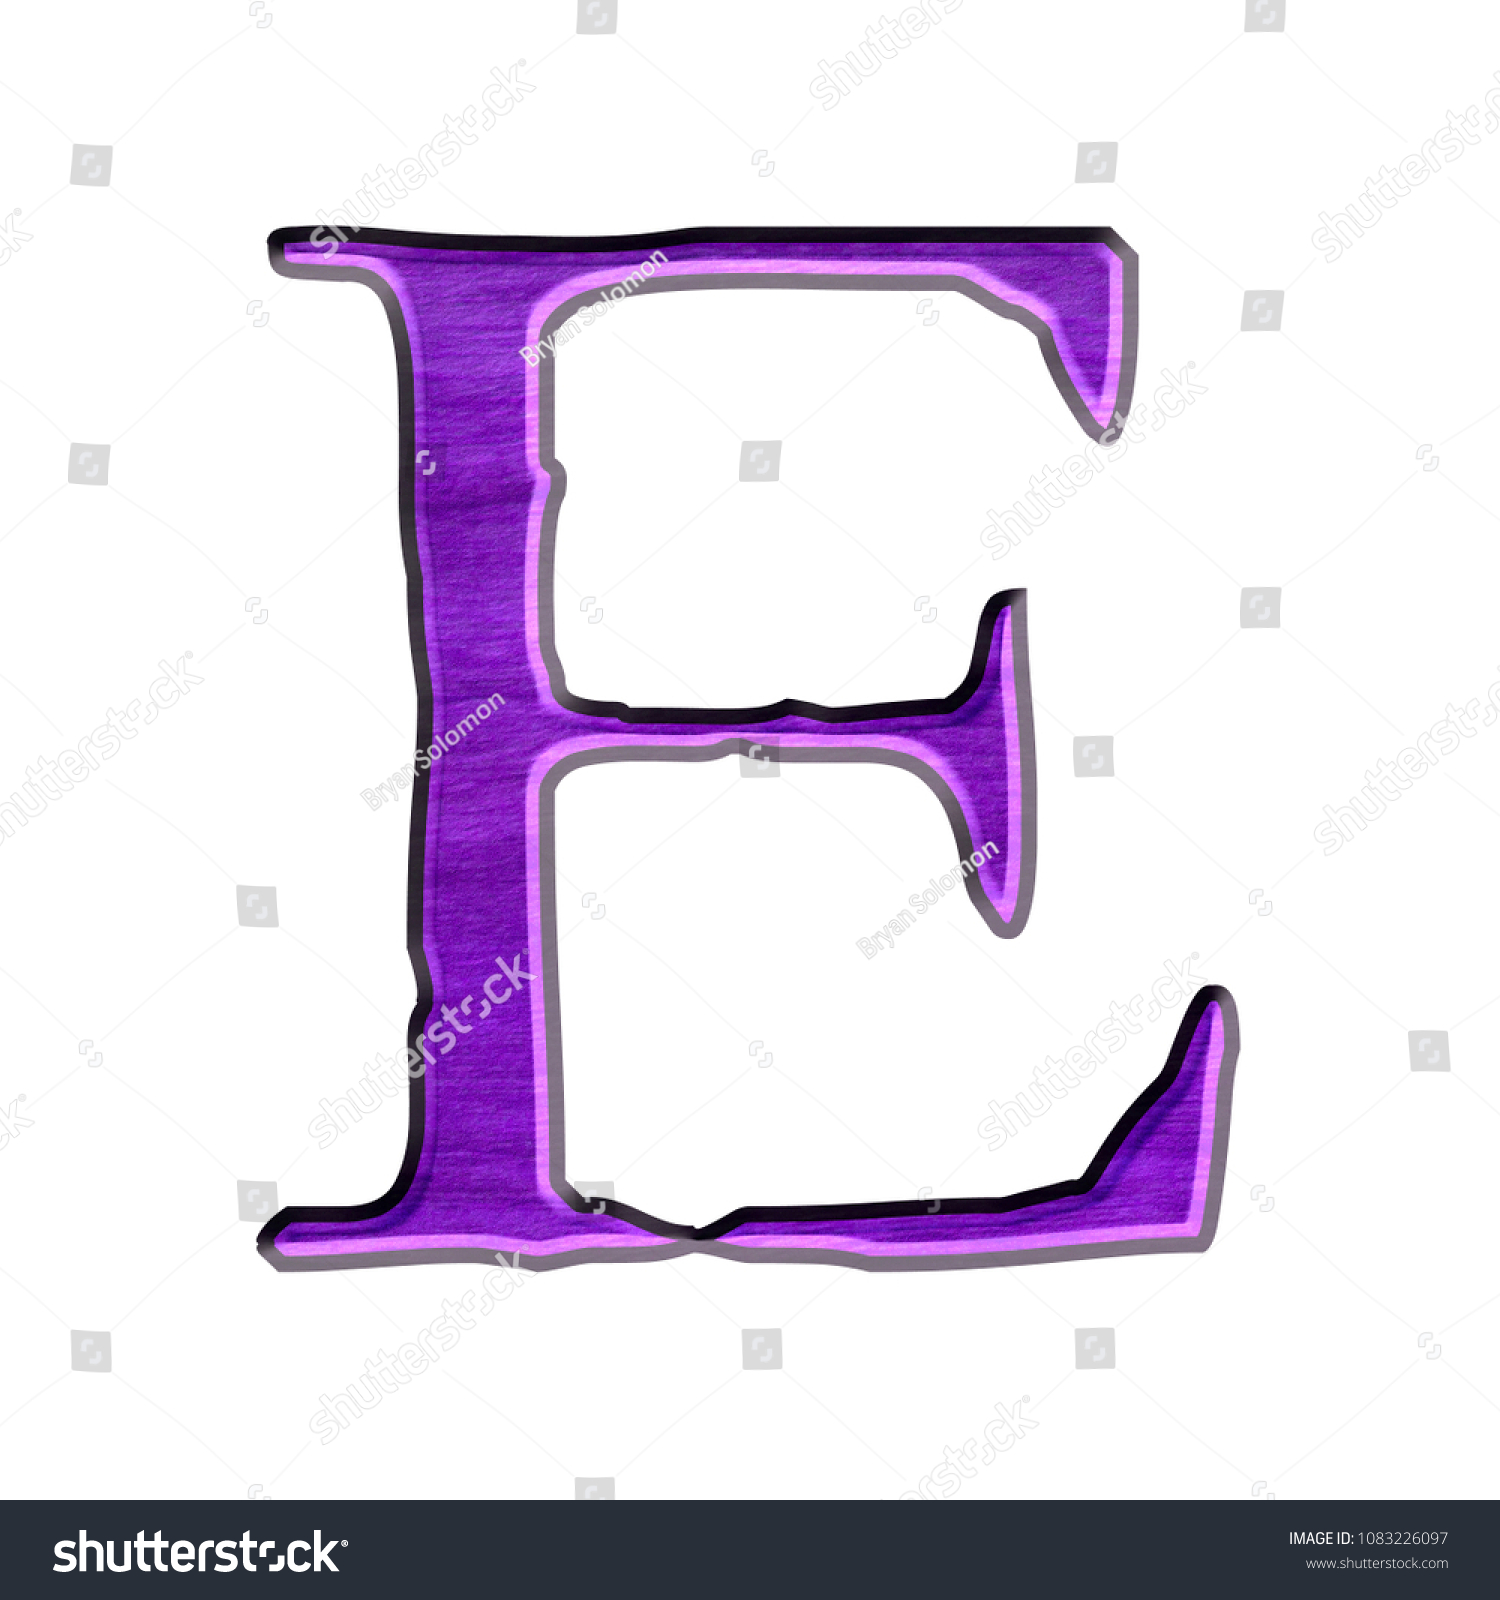 Royalty Free Stock Illustration Of Purple Color Wood Style Letter E